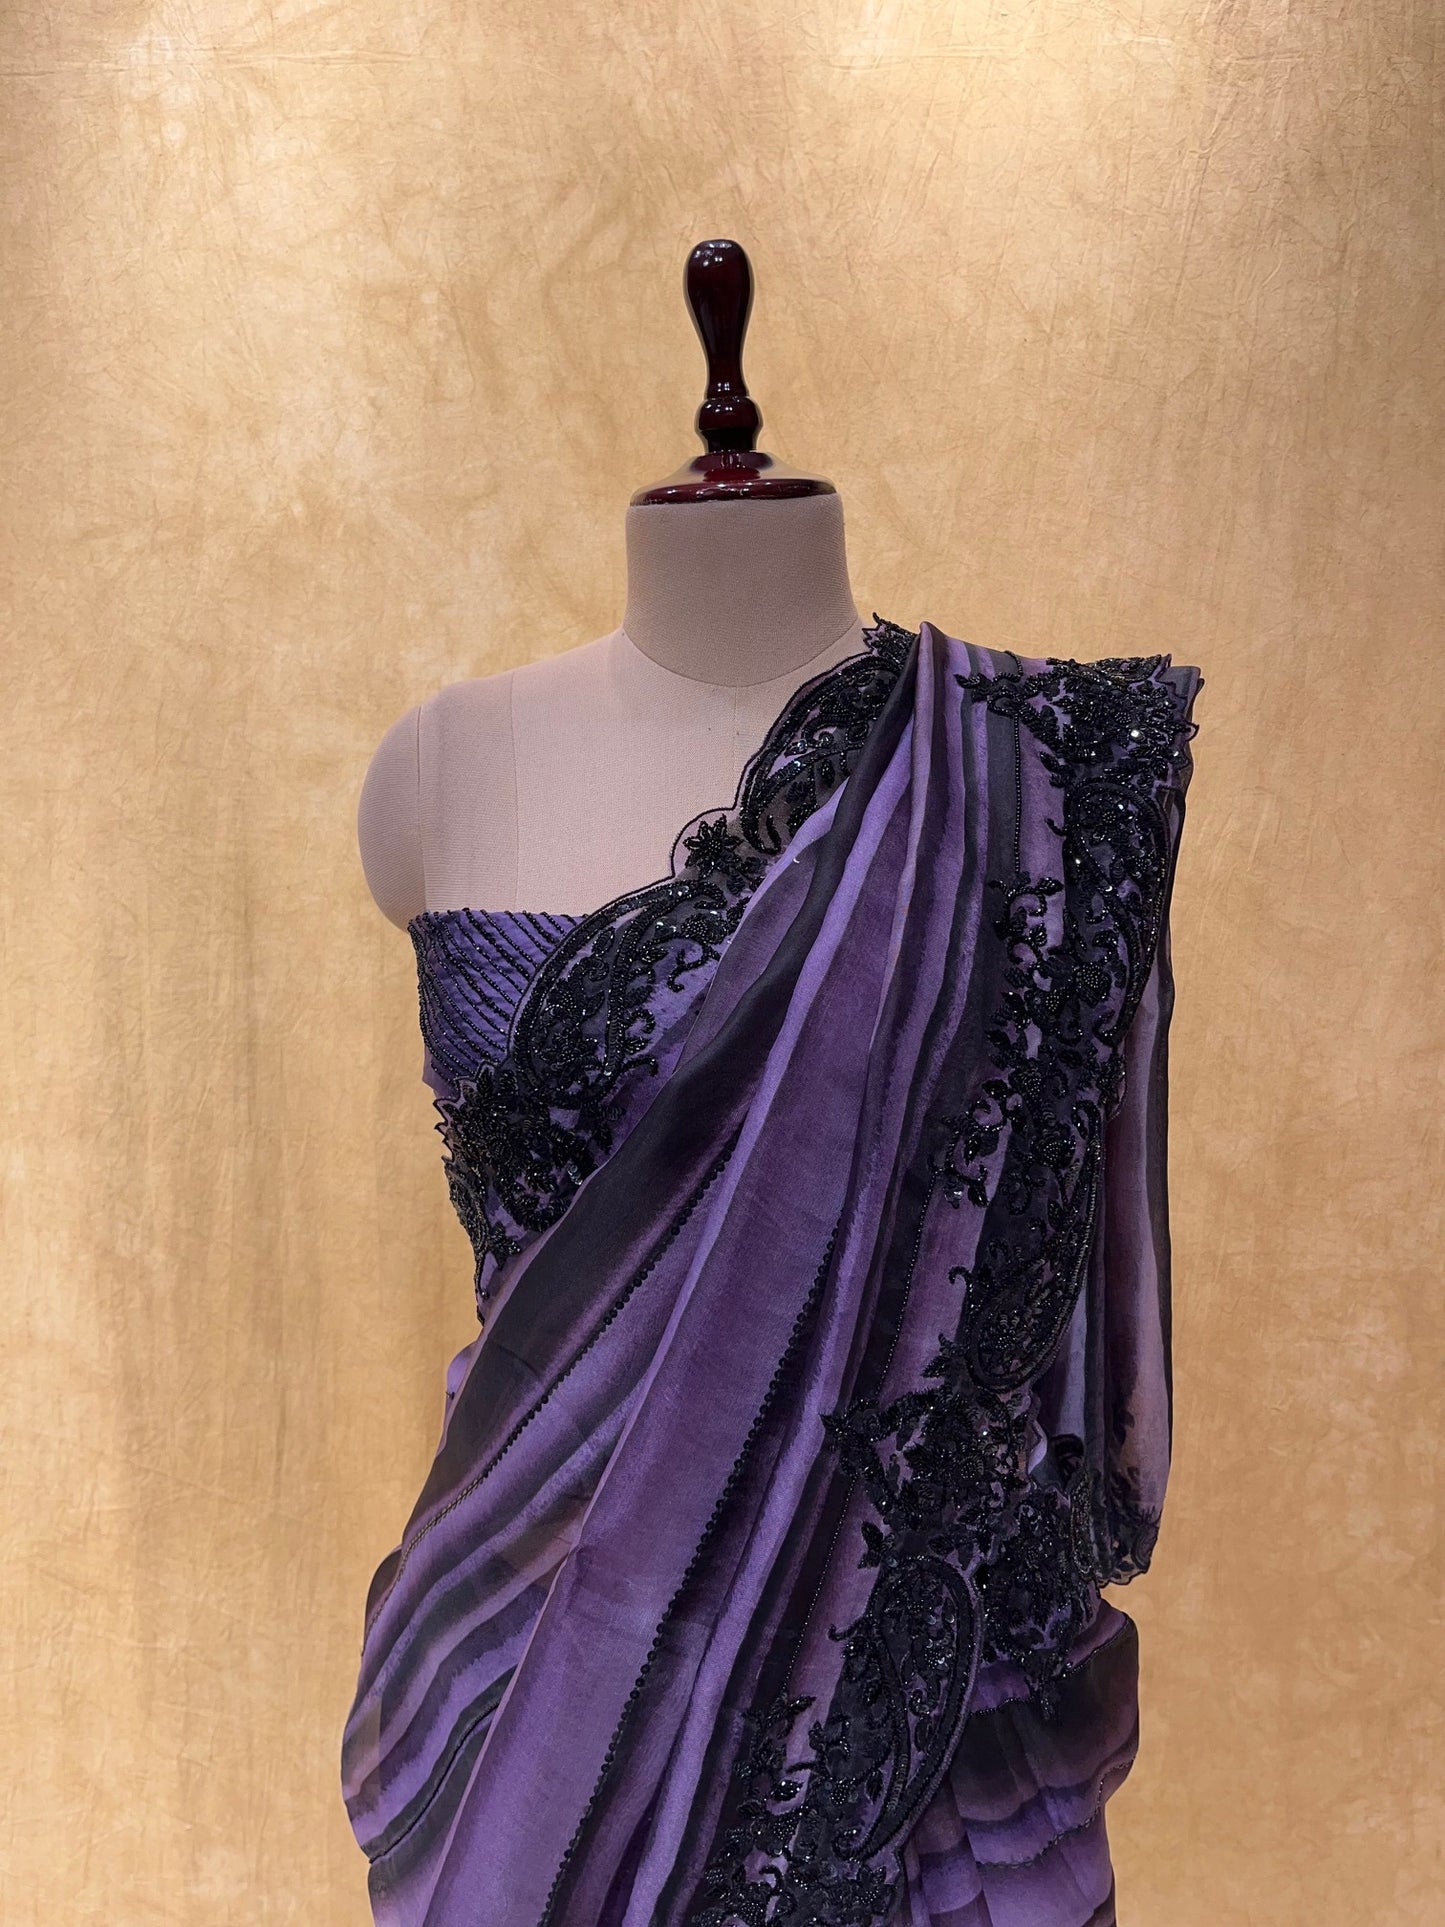 PURPLE & BLACK COLOUR ORGANZA SAREE EMBELLISHED WITH SEQUINS & CUTDANA WORK